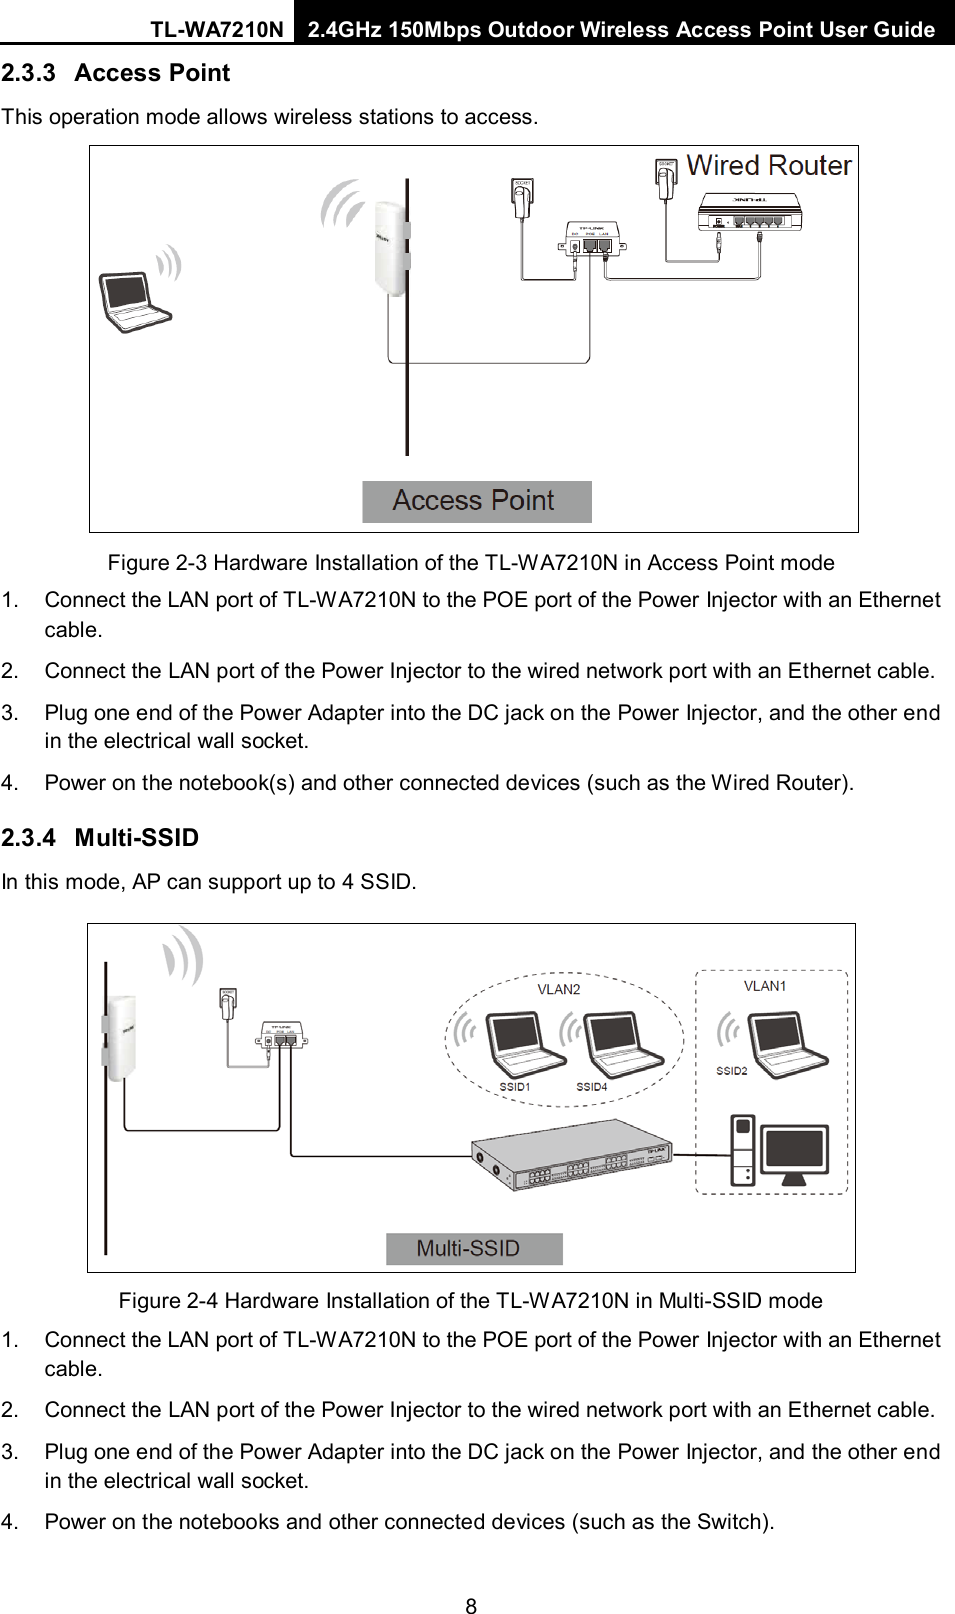 TL-WA7210N 2.4GHz 150Mbps Outdoor Wireless Access Point User Guide  8 2.3.3 Access Point This operation mode allows wireless stations to access.  Figure 2-3 Hardware Installation of the TL-WA7210N in Access Point mode 1. Connect the LAN port of TL-WA7210N to the POE port of the Power Injector with an Ethernet cable. 2. Connect the LAN port of the Power Injector to the wired network port with an Ethernet cable. 3. Plug one end of the Power Adapter into the DC jack on the Power Injector, and the other end in the electrical wall socket. 4. Power on the notebook(s) and other connected devices (such as the Wired Router). 2.3.4 Multi-SSID   In this mode, AP can support up to 4 SSID.  Figure 2-4 Hardware Installation of the TL-WA7210N in Multi-SSID mode 1. Connect the LAN port of TL-WA7210N to the POE port of the Power Injector with an Ethernet cable. 2. Connect the LAN port of the Power Injector to the wired network port with an Ethernet cable. 3. Plug one end of the Power Adapter into the DC jack on the Power Injector, and the other end in the electrical wall socket. 4. Power on the notebooks and other connected devices (such as the Switch). 